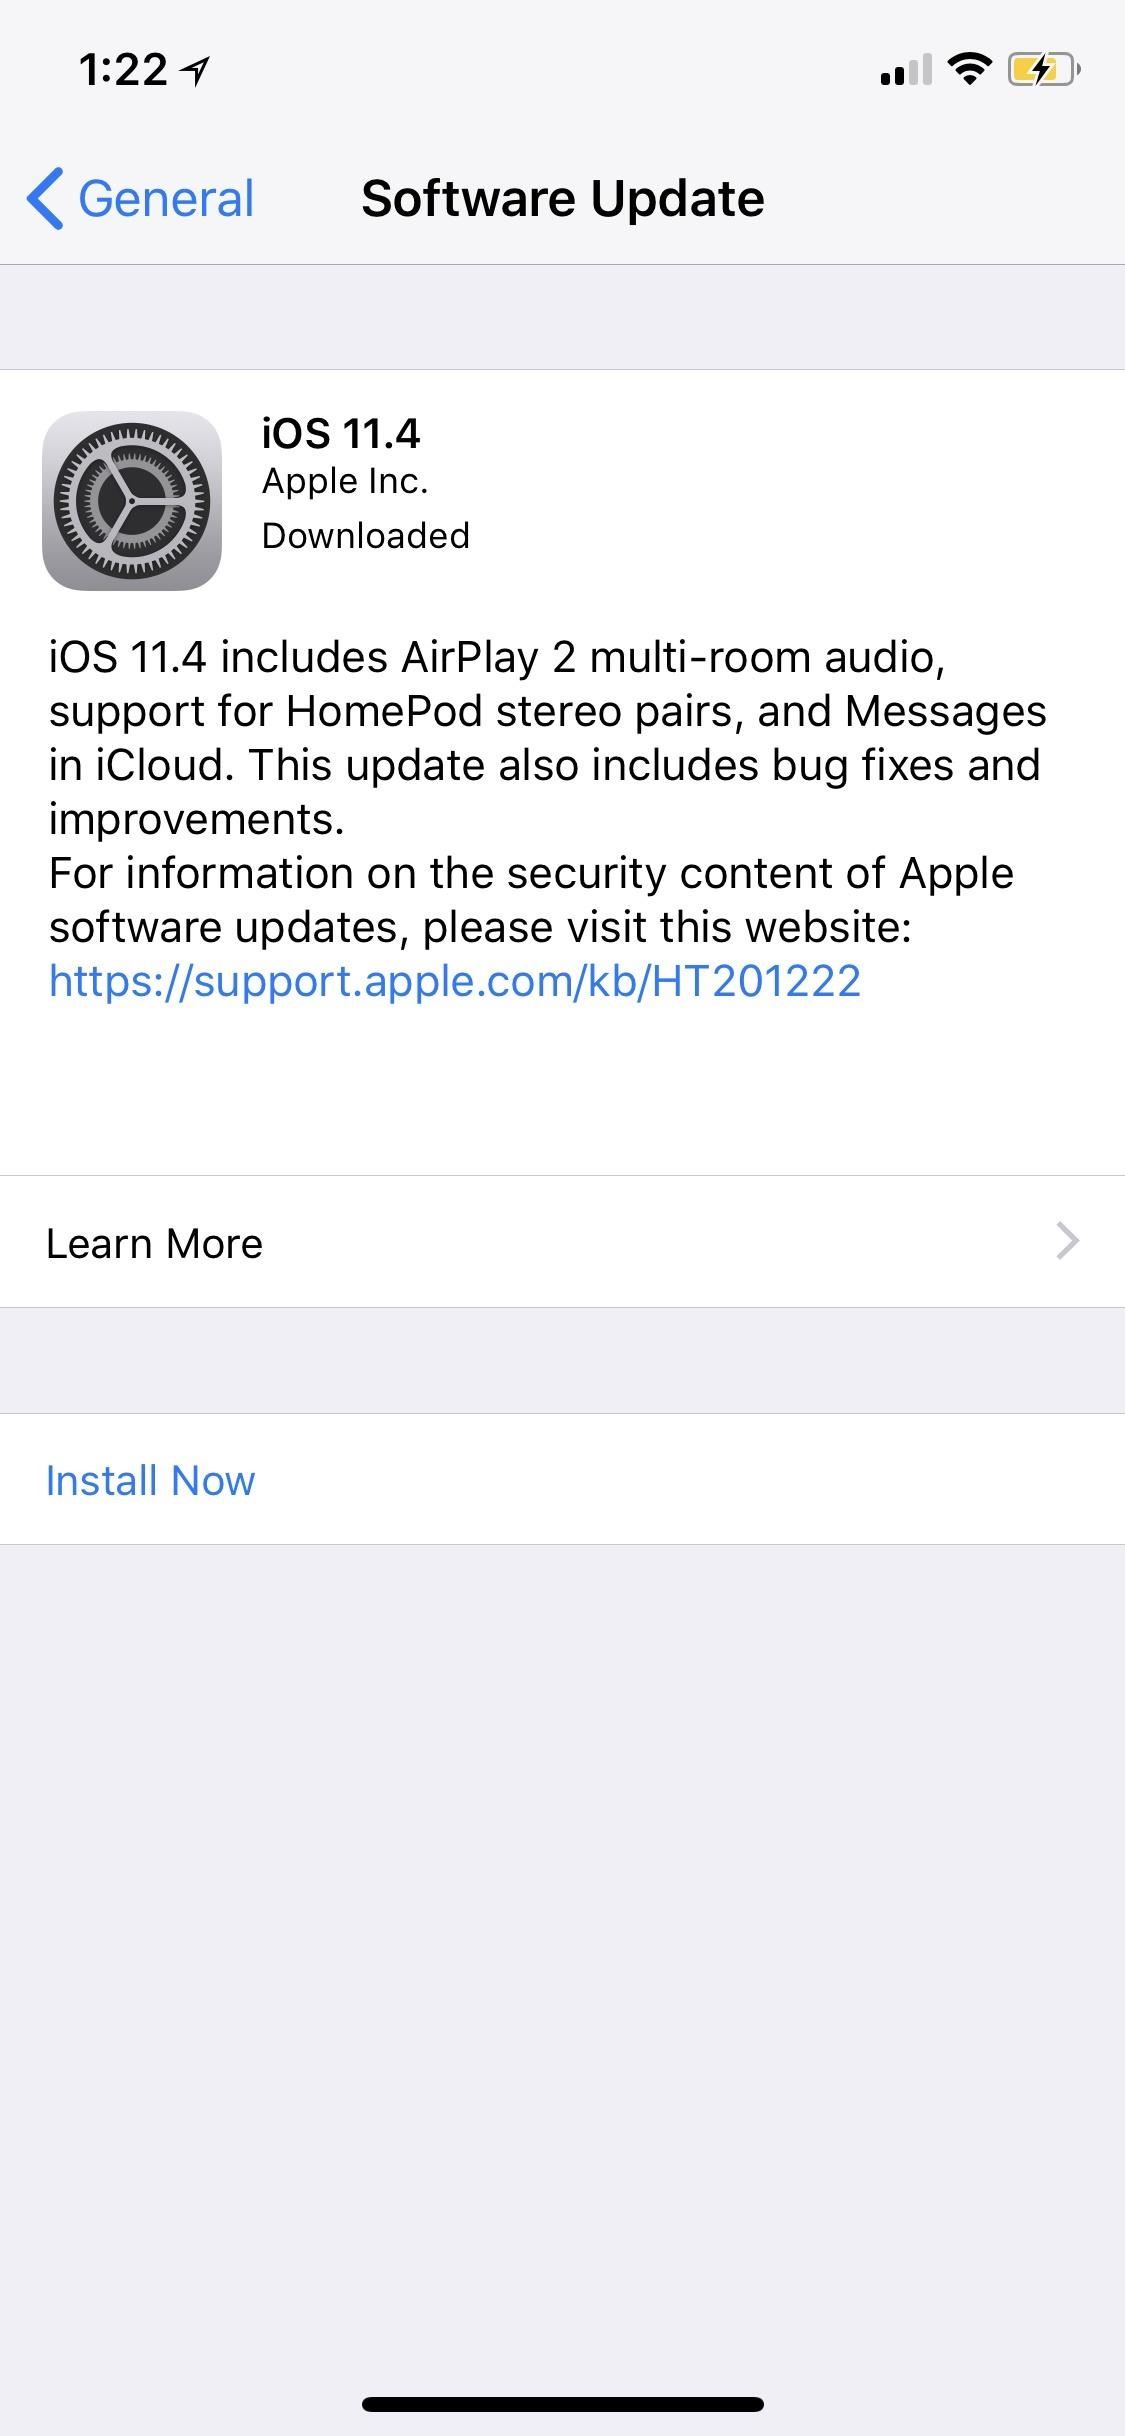 iOS 11.4 Released to Everyone, Includes AirPlay 2, Messages in iCloud, New Wallpaper & More